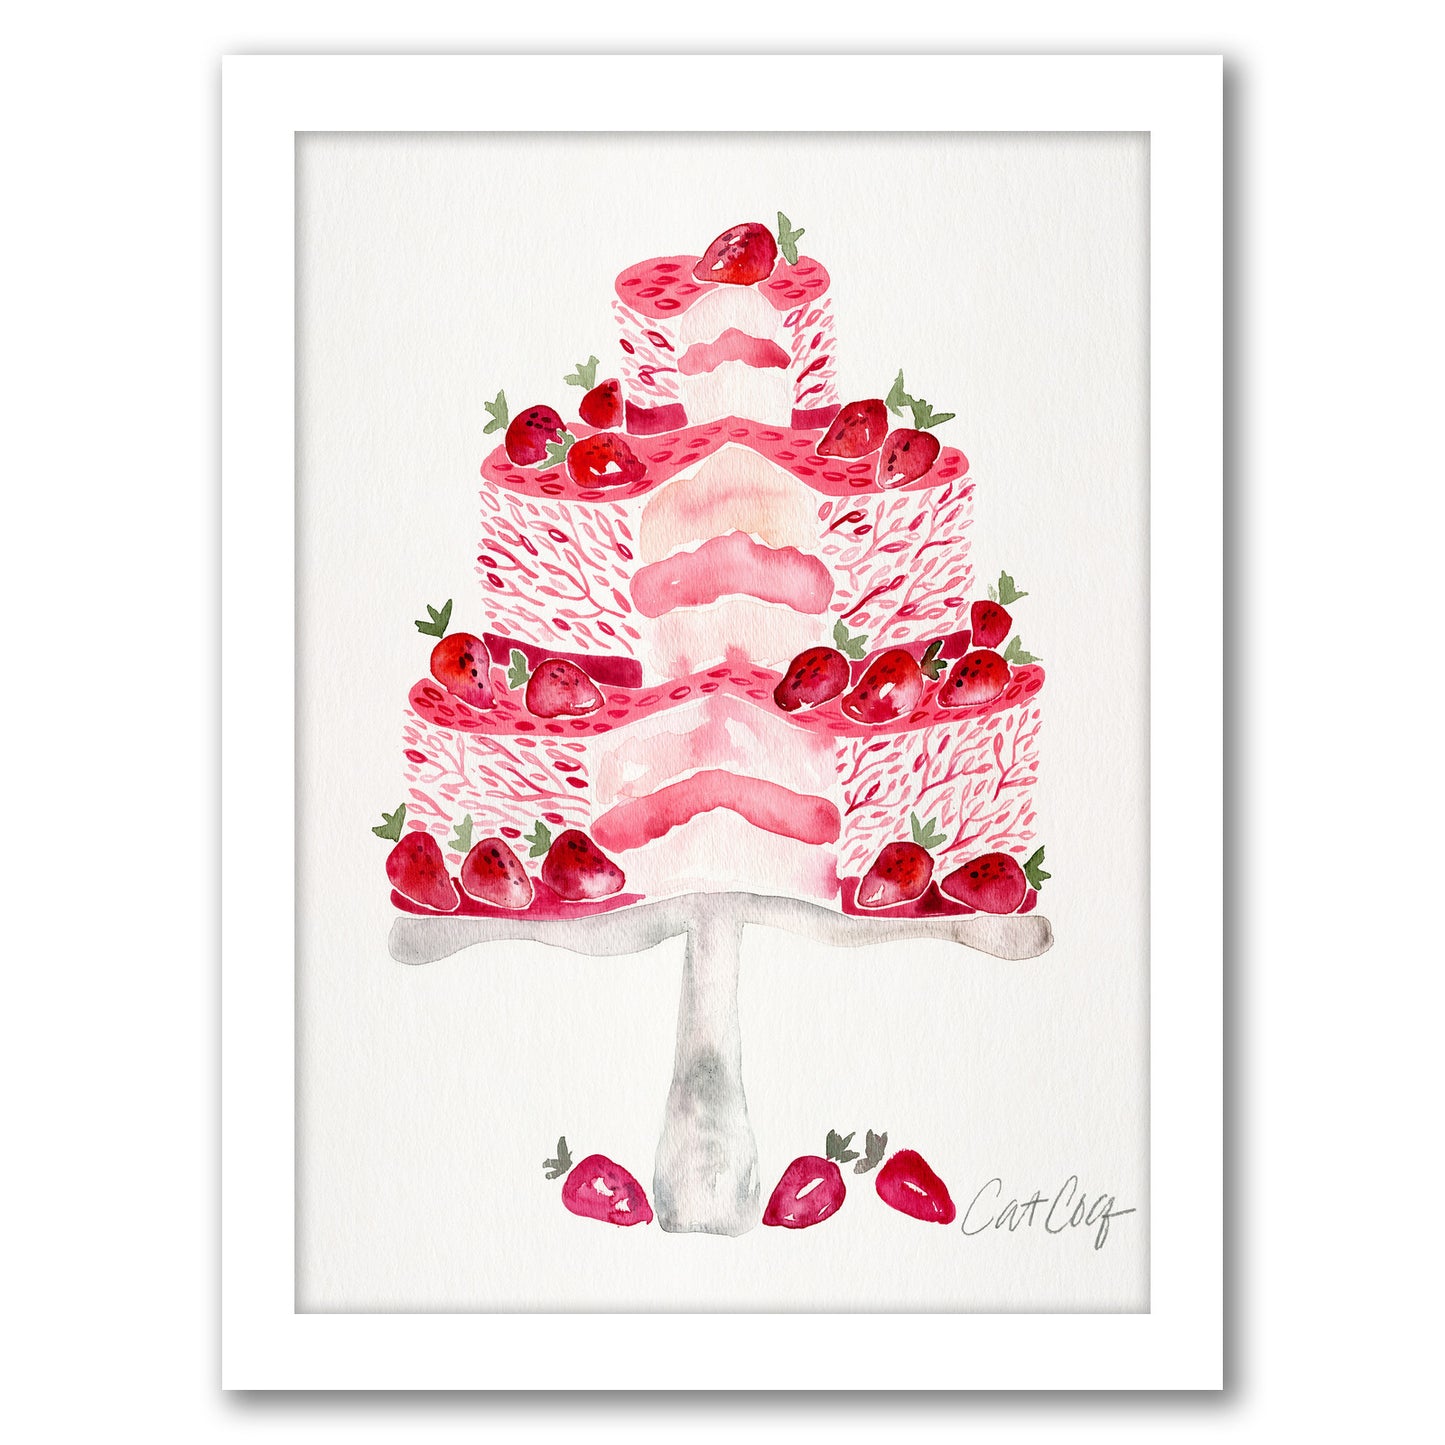 Strawberry Short Cake by Cat Coquillette - Framed Print